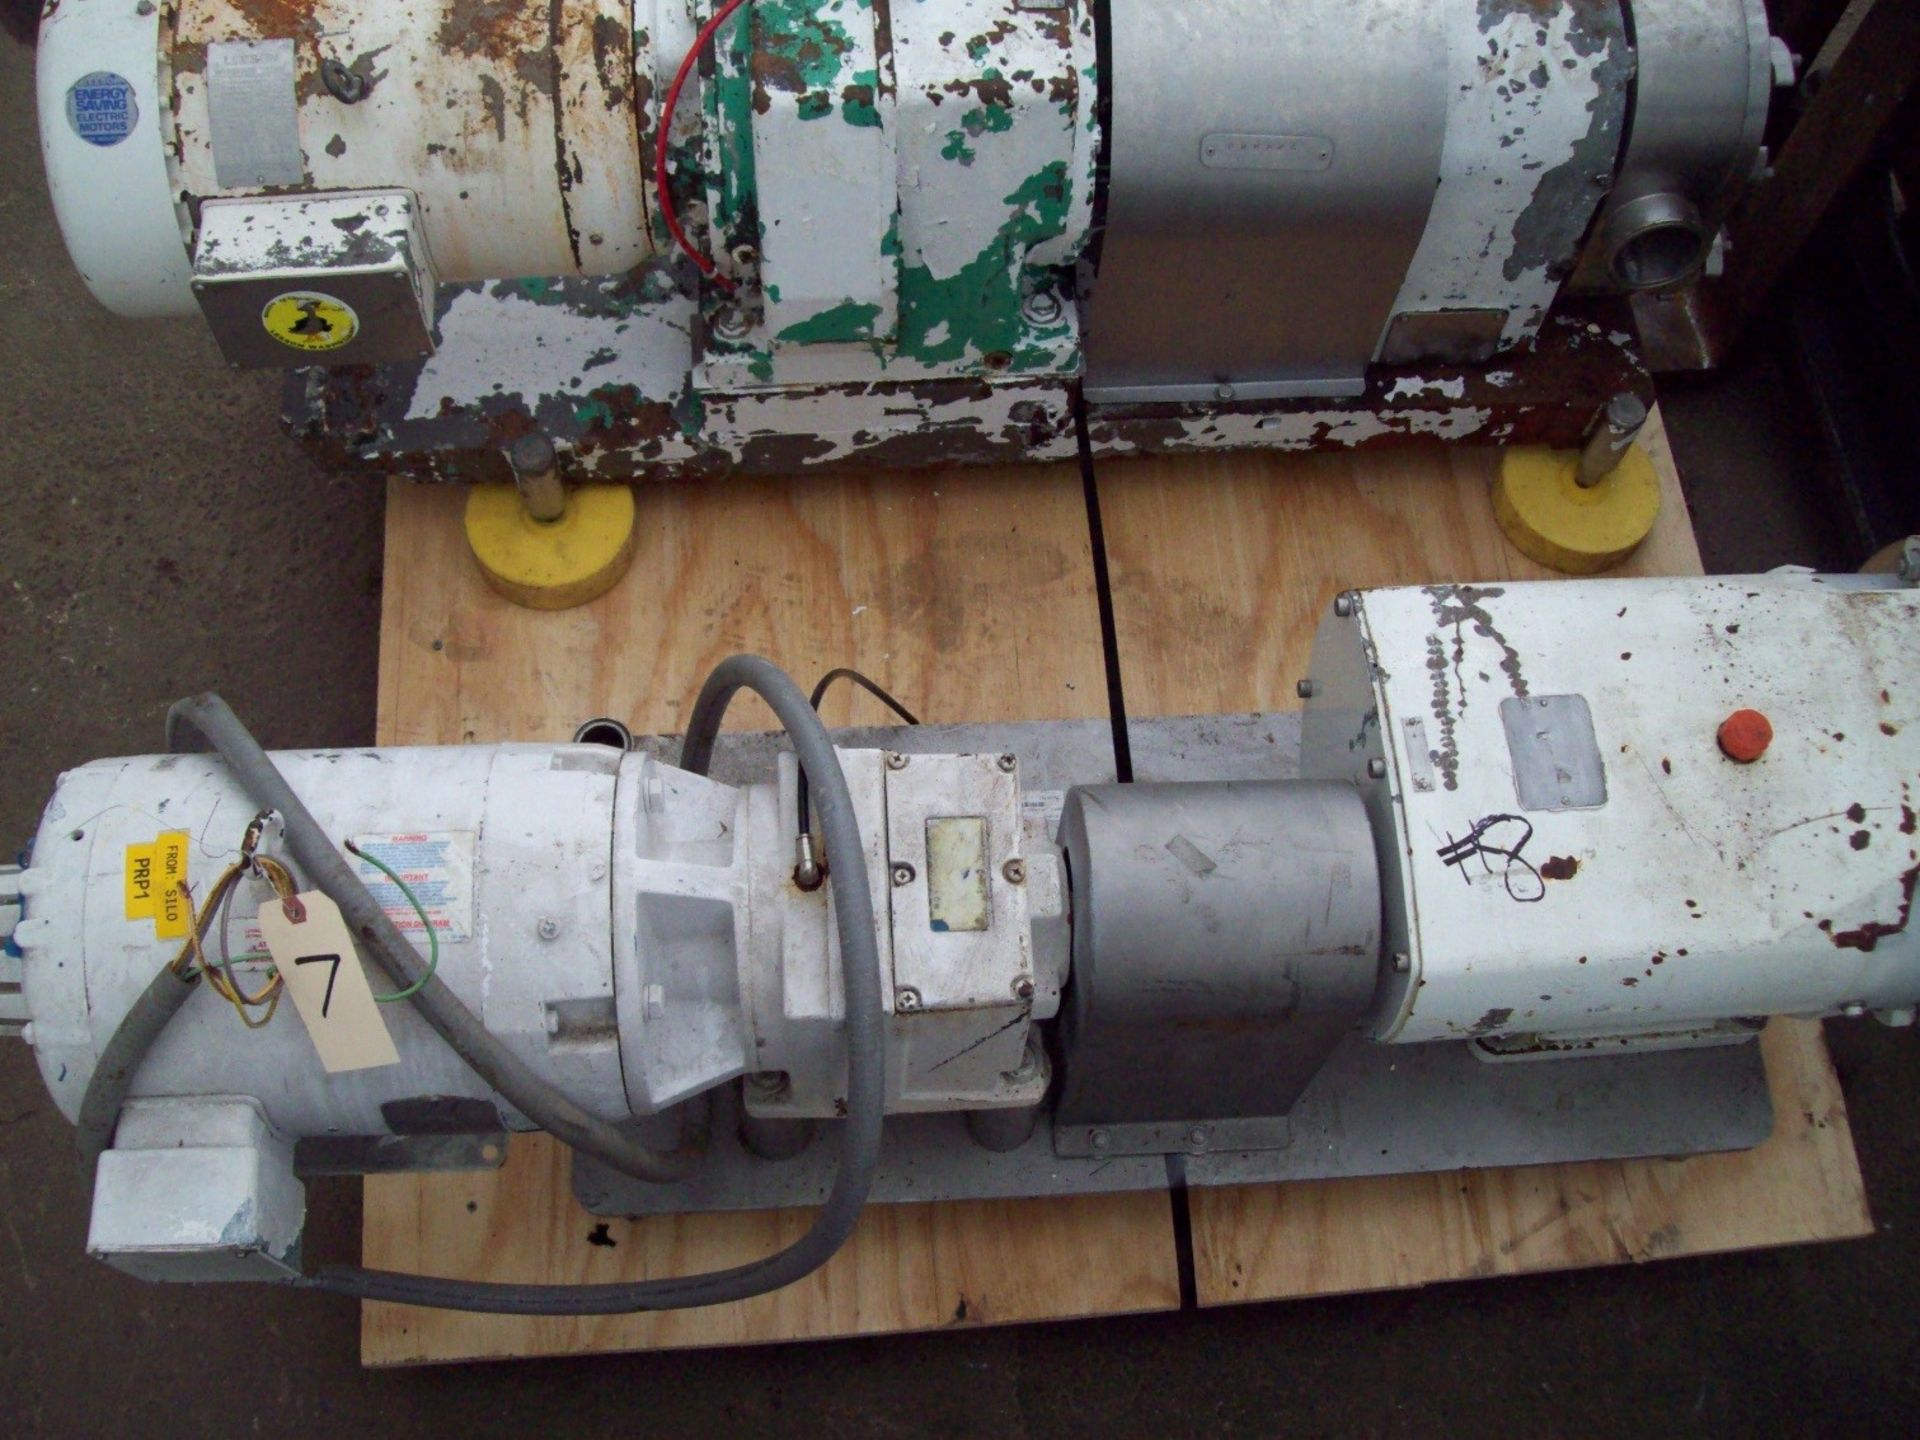 G&H 5 HP S/S Rotary Positive Displacement Pump, Model 732, S/N 94-12-4770A, 1760 RPM, 4” Inlet and